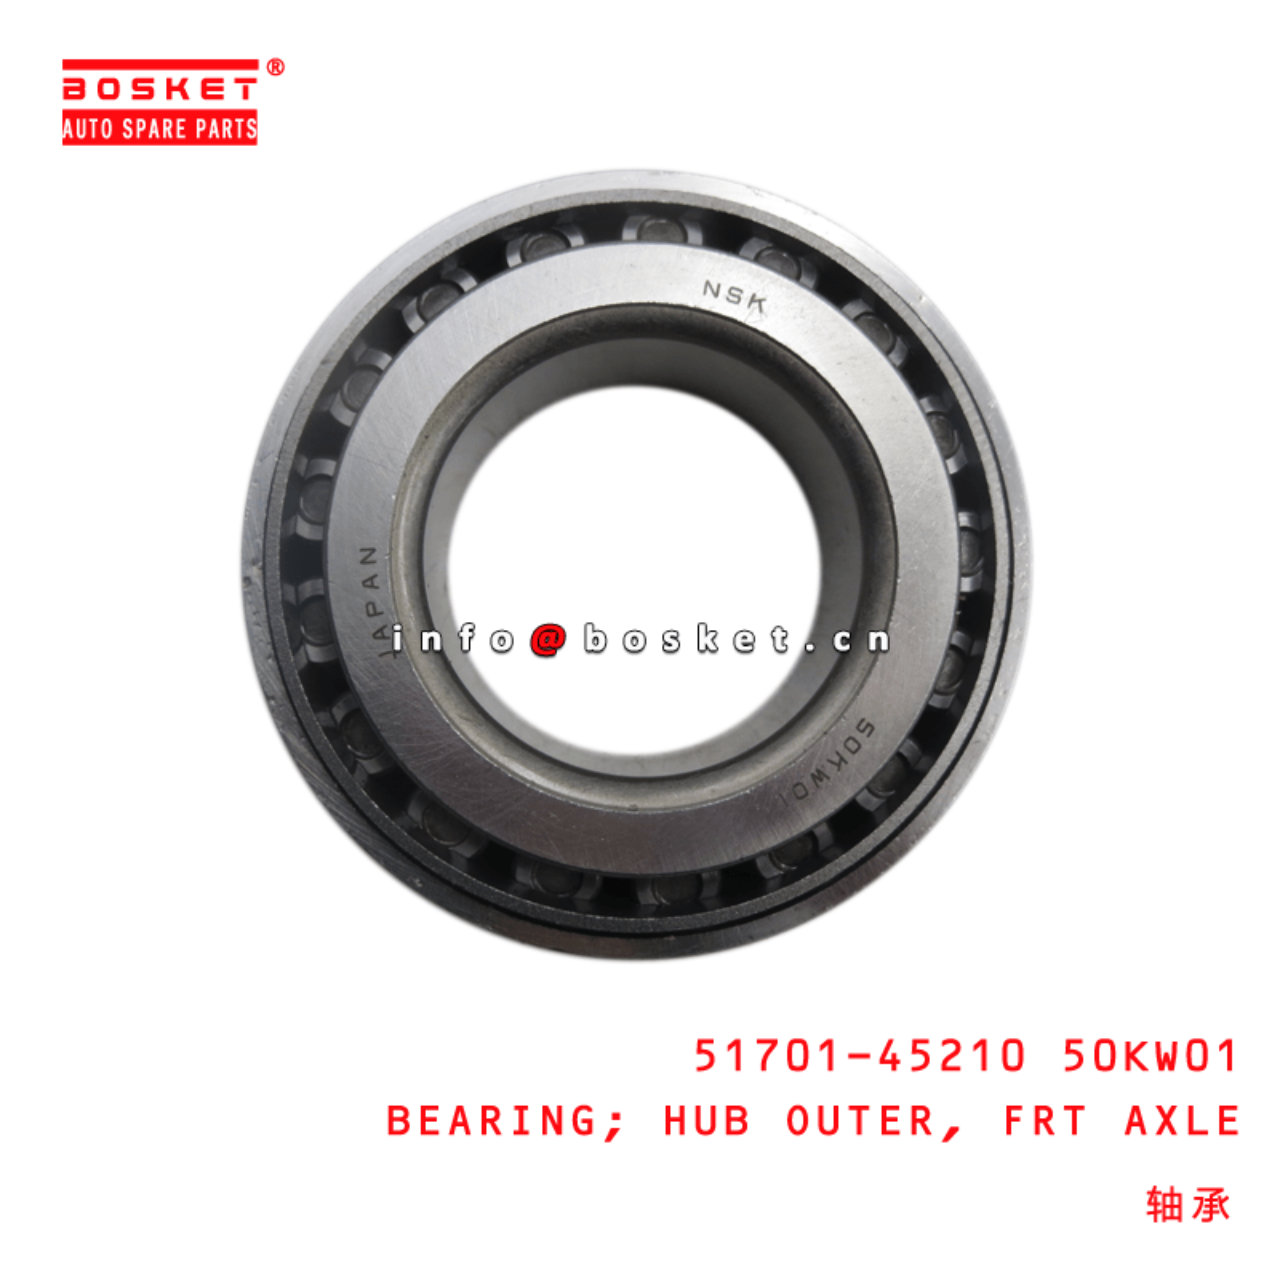 51701-45210 50KW01 Front Axle Hub Outer Bearing Suitable For MITSUBISHI FUSO HD72/65/78